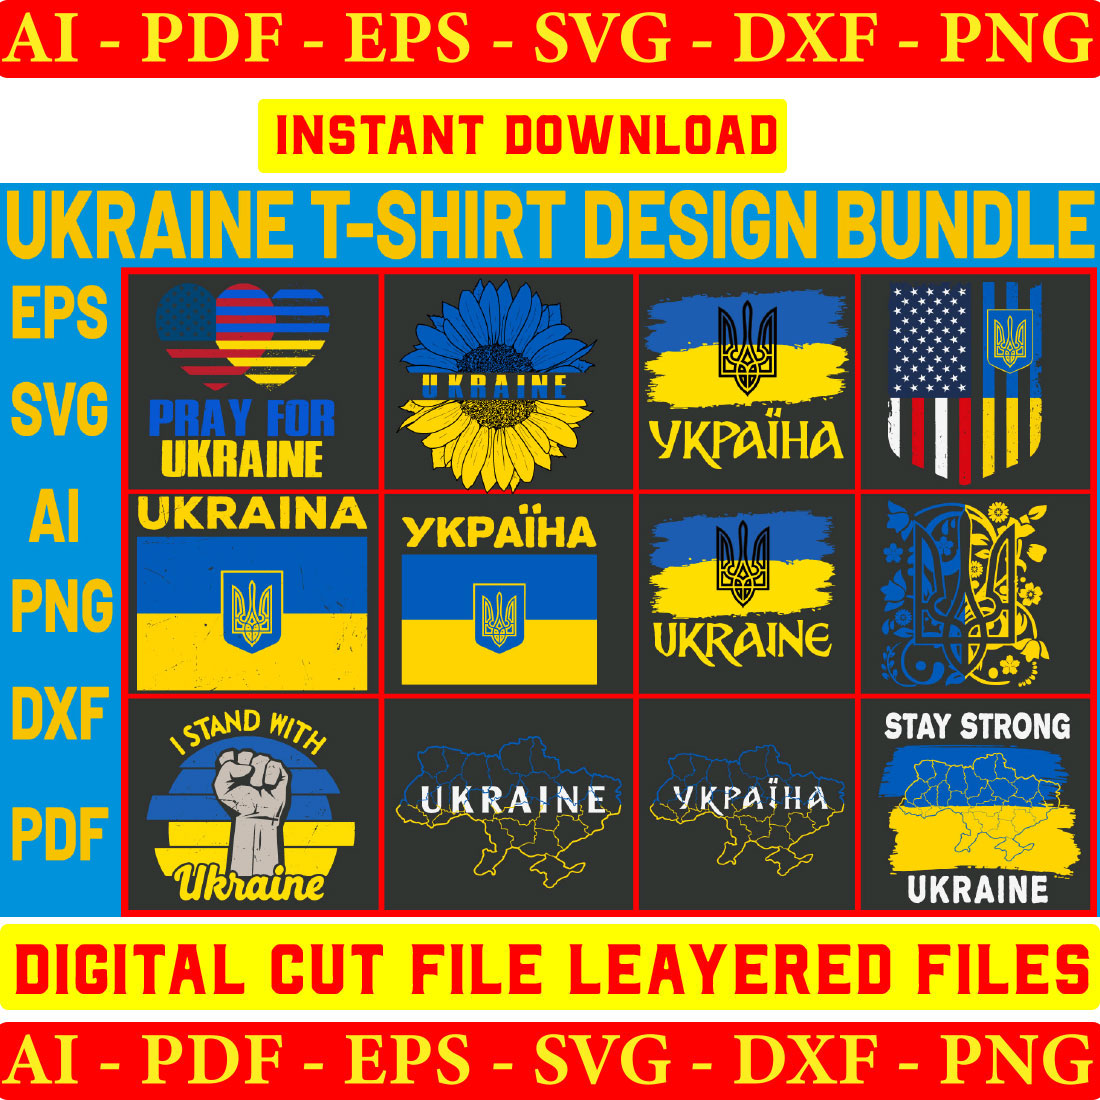 Stand with Ukraine Design Bundle preview image.